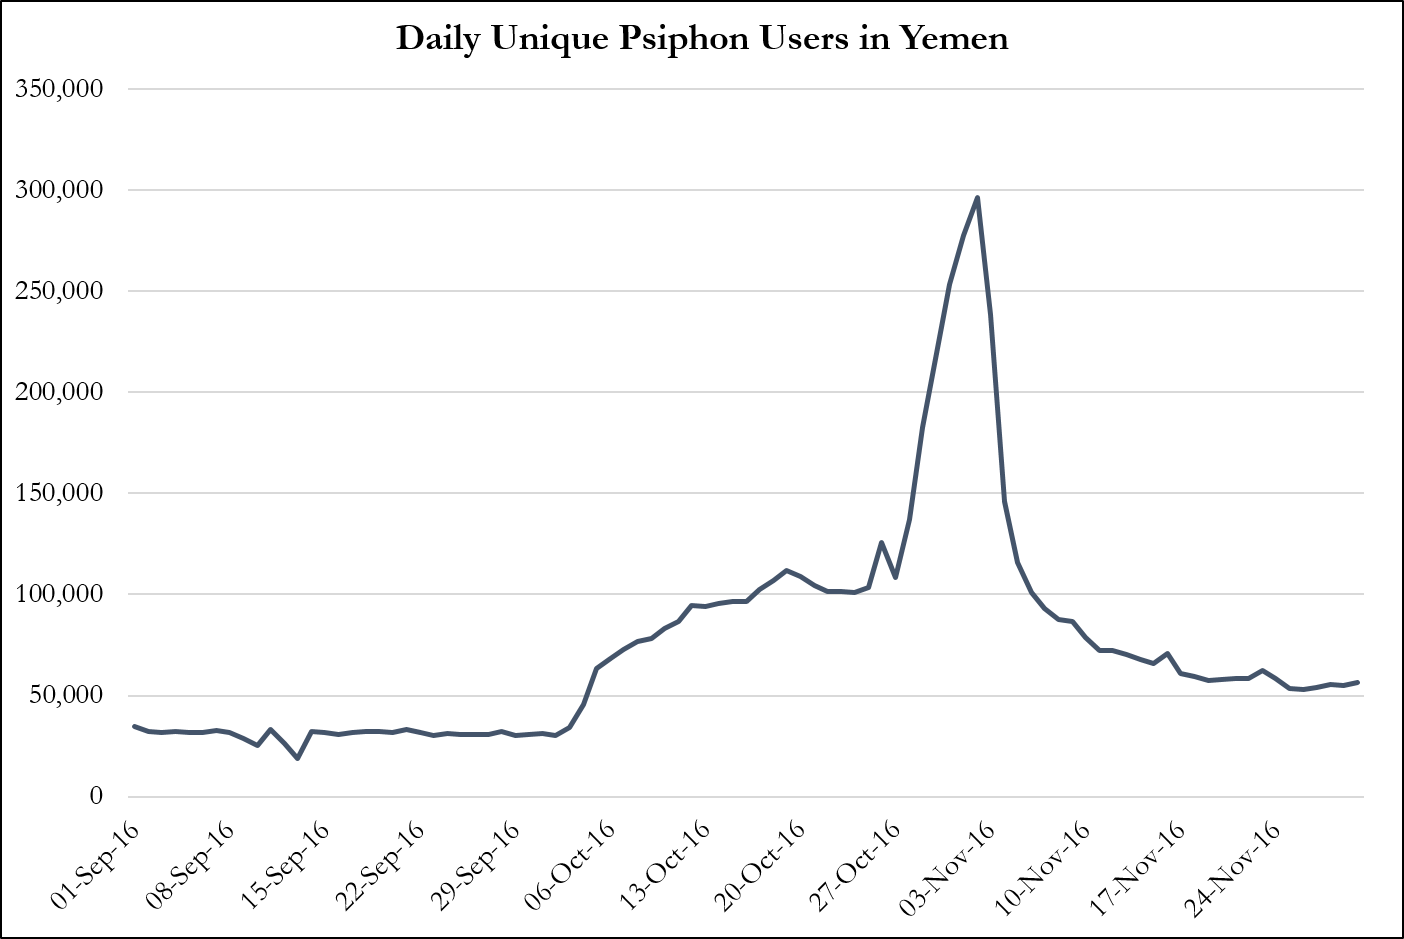 Daily Unique Psiphon Users in Yemen